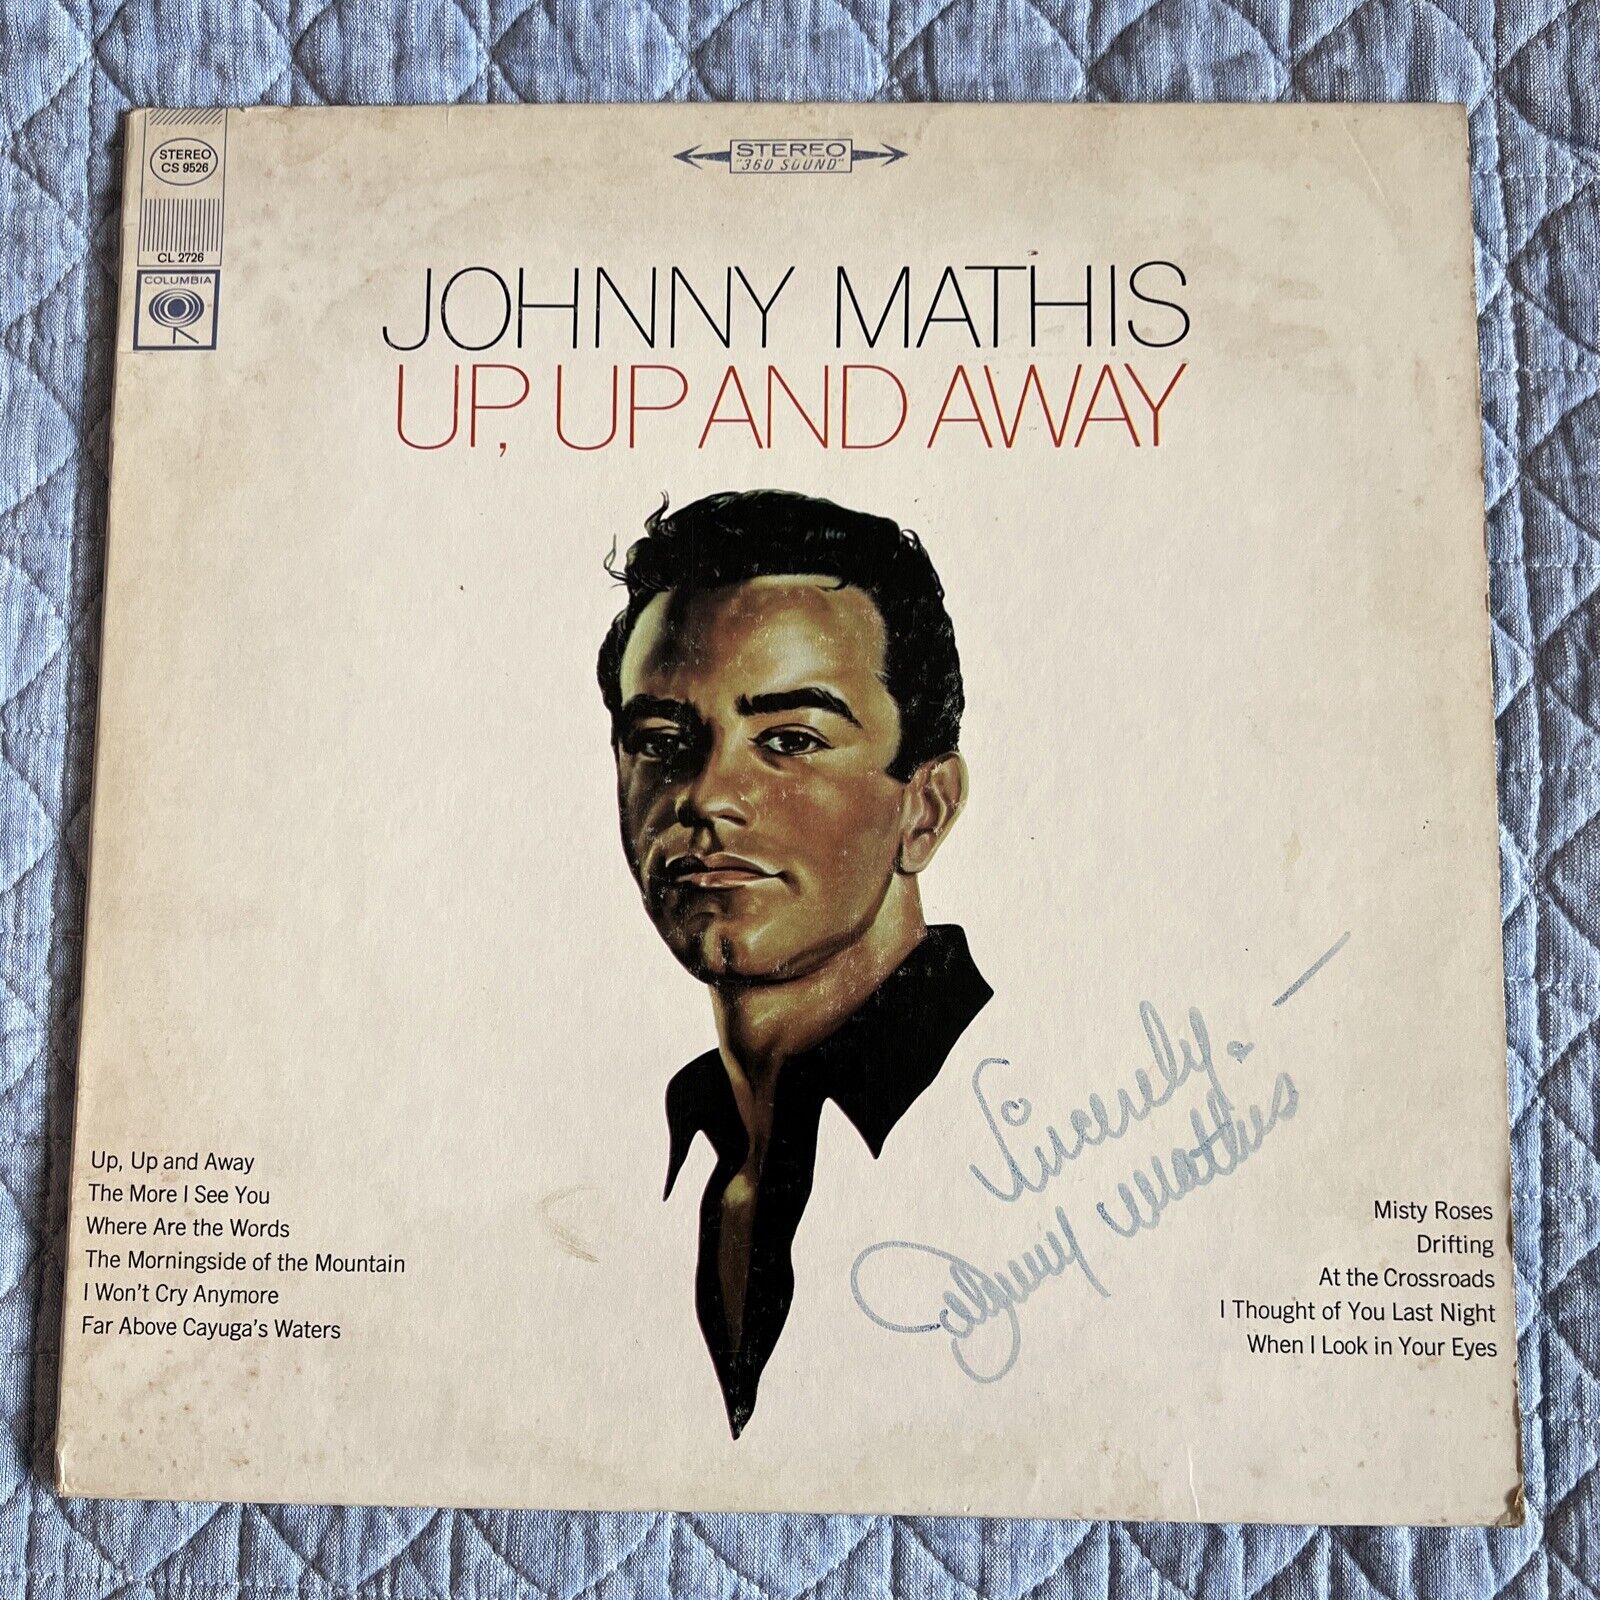 SIGNED Johnny Mathis Up Up And Away LP Vinyl Album